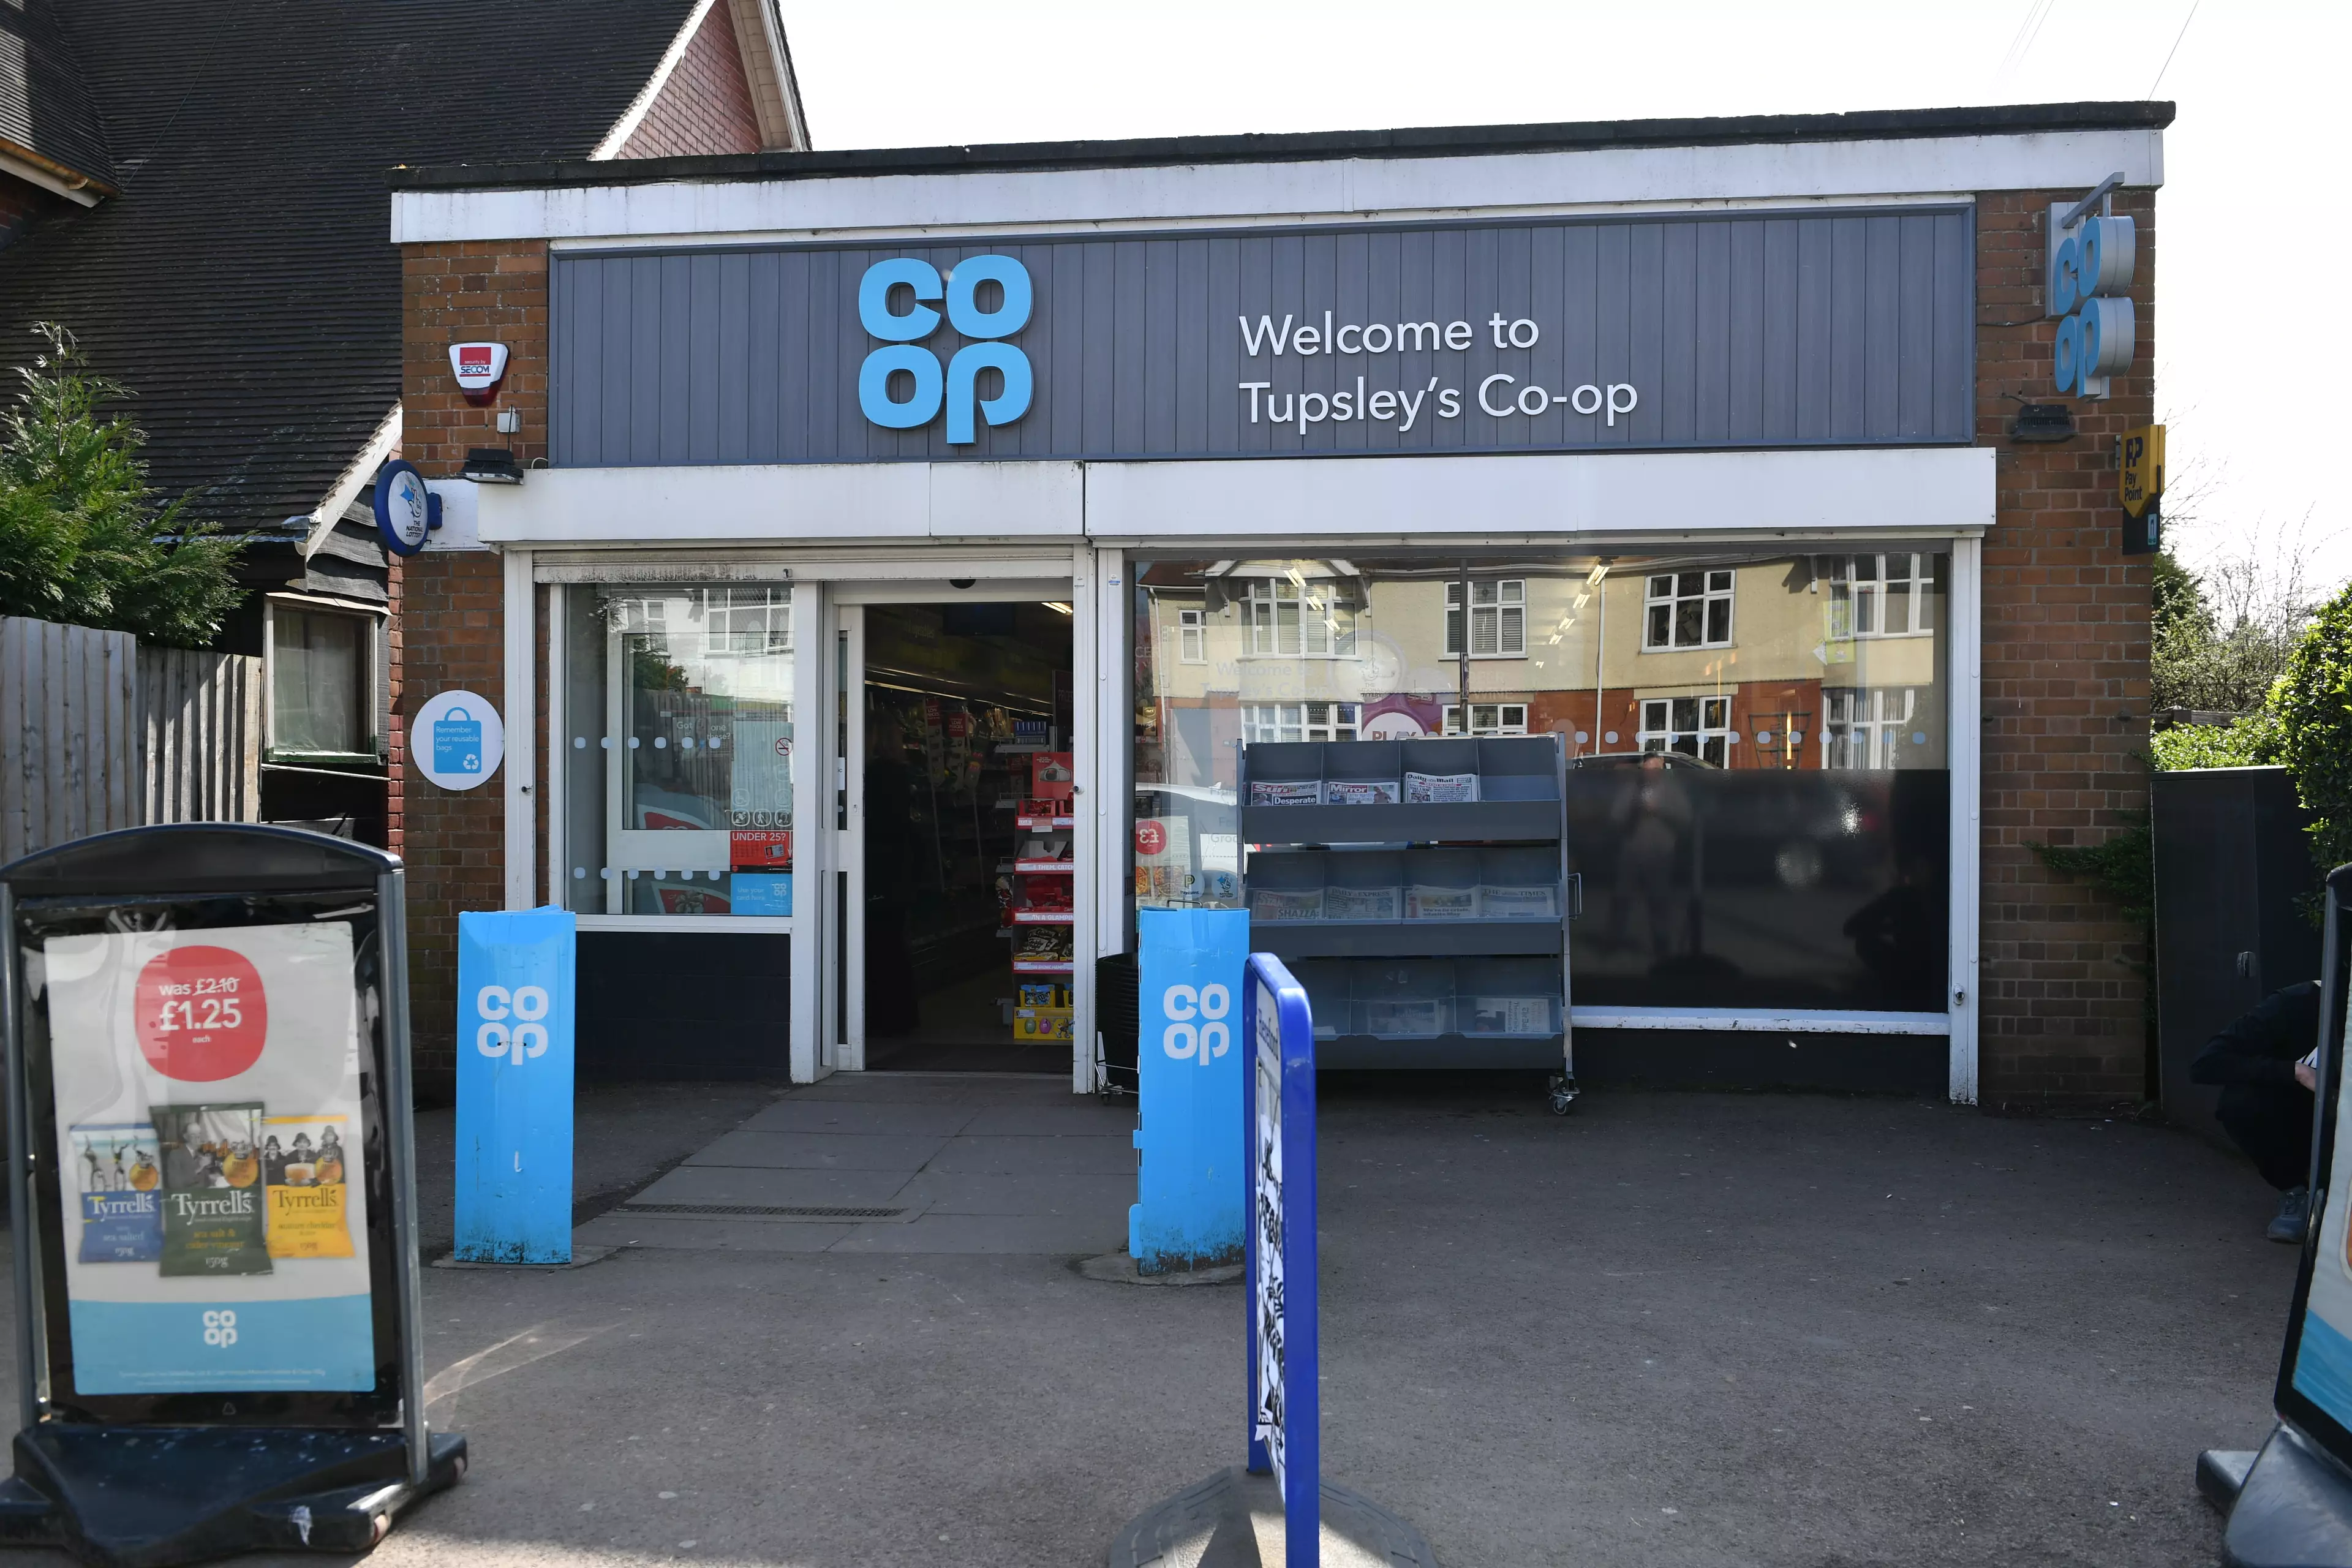 The Co-op has created 5,000 jobs (